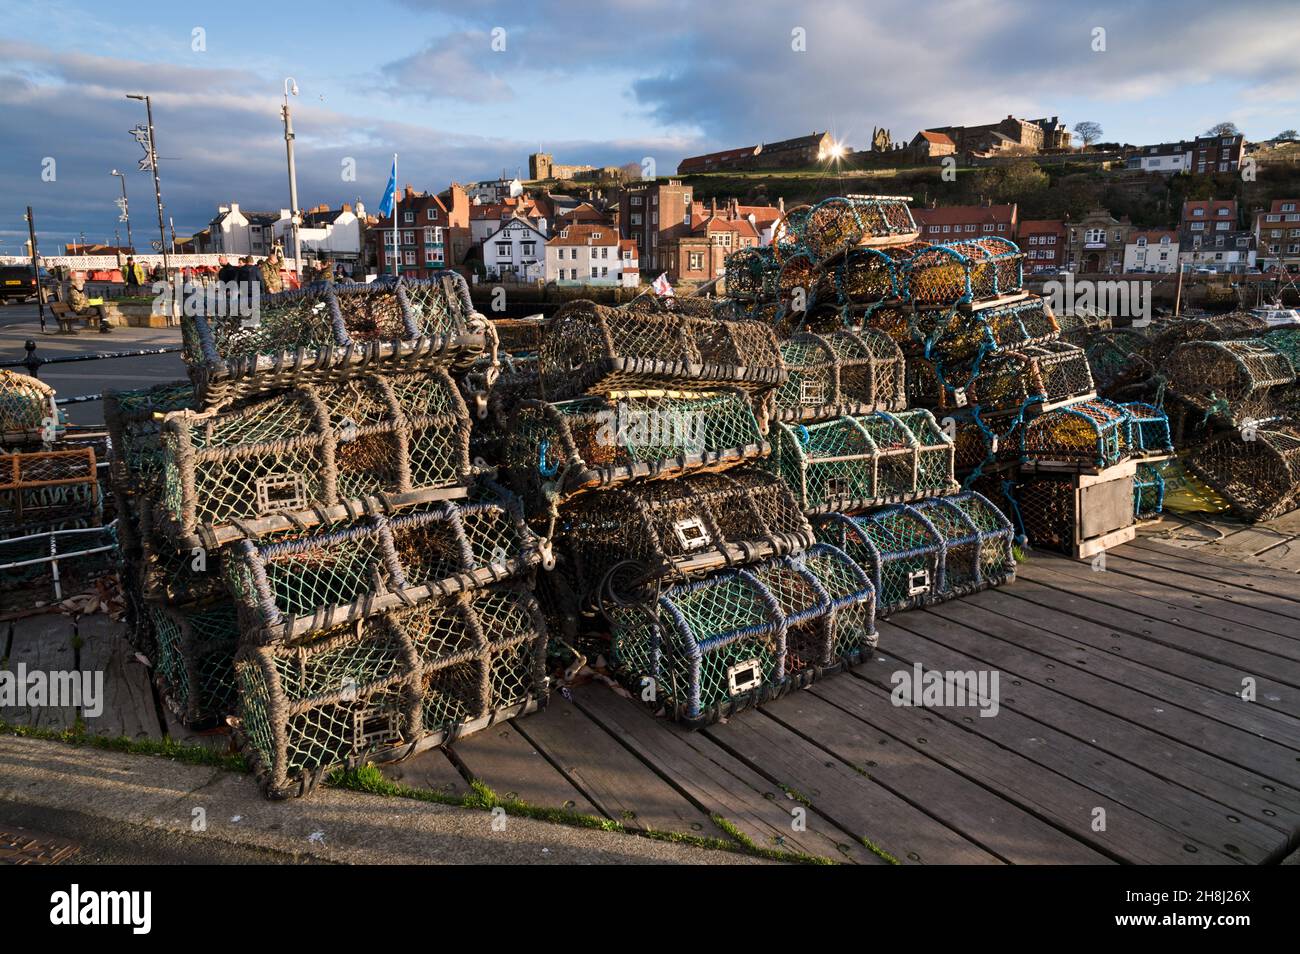 Lobster pots on the quay at Whitby harbour, Nortrh Yorkshire, UK. Stock Photo